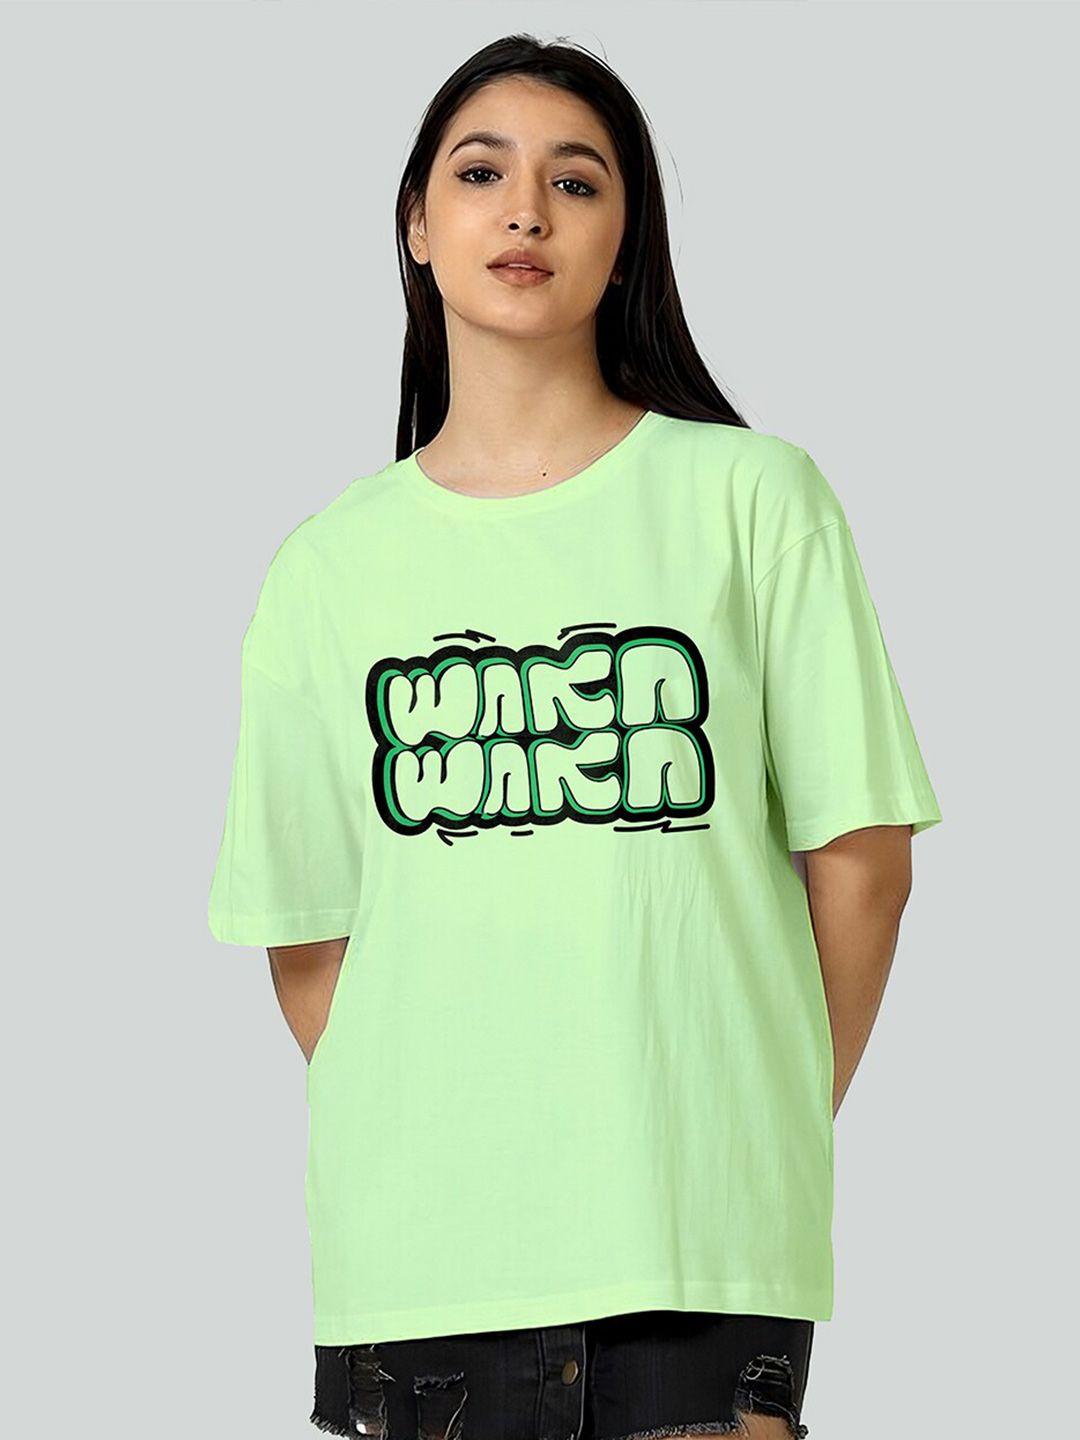 bloopers store women green typography pockets t-shirt